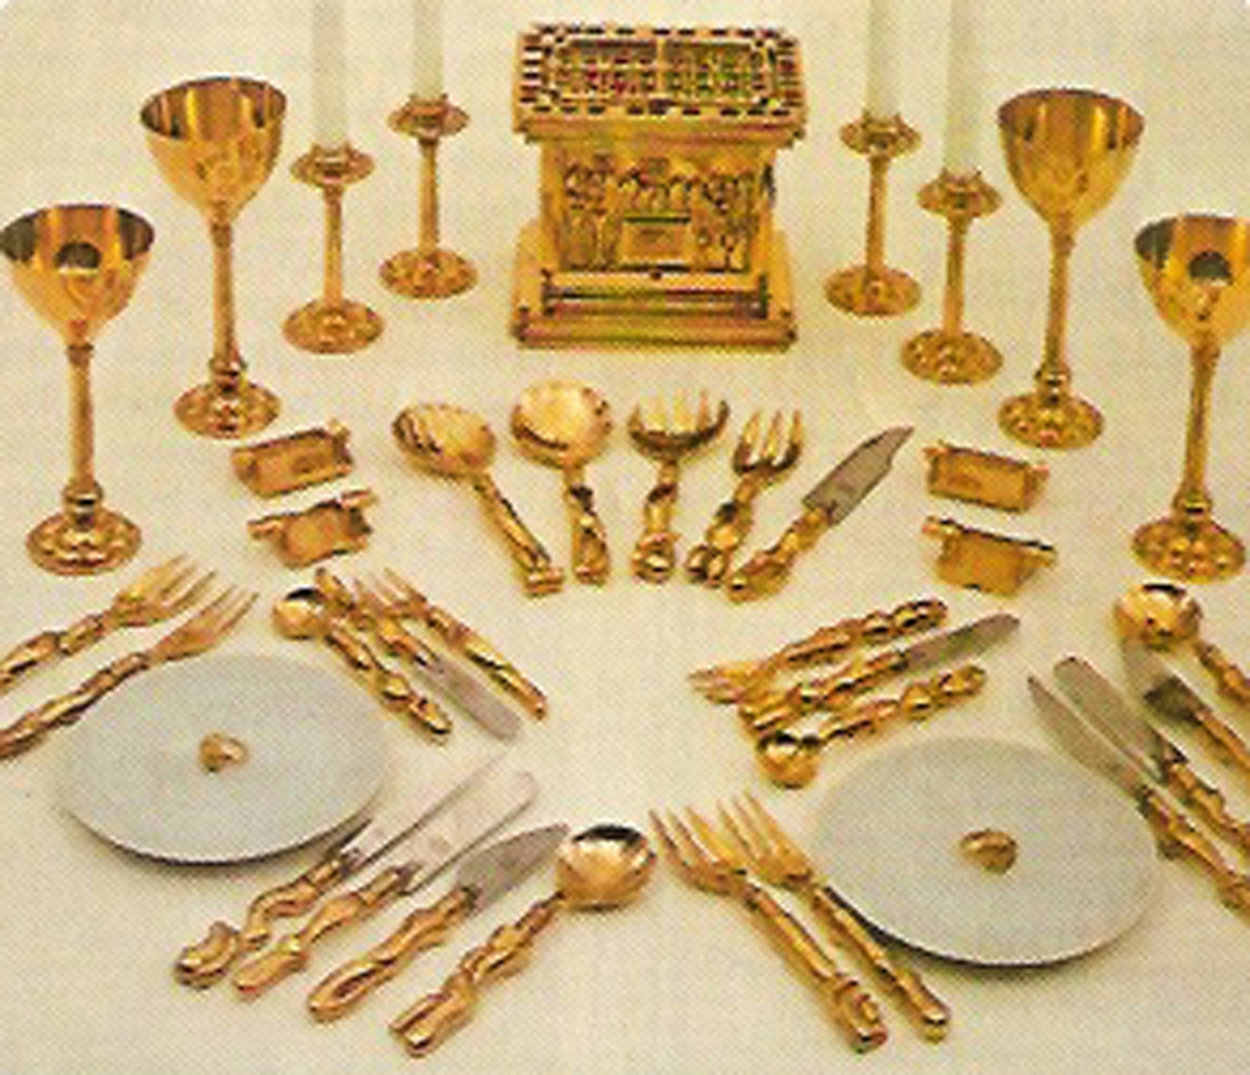 Romeo And Juliet Beauty And The Feast, Gold Plated Place Setting 1969 Other by Miguel Ortiz Berrocal